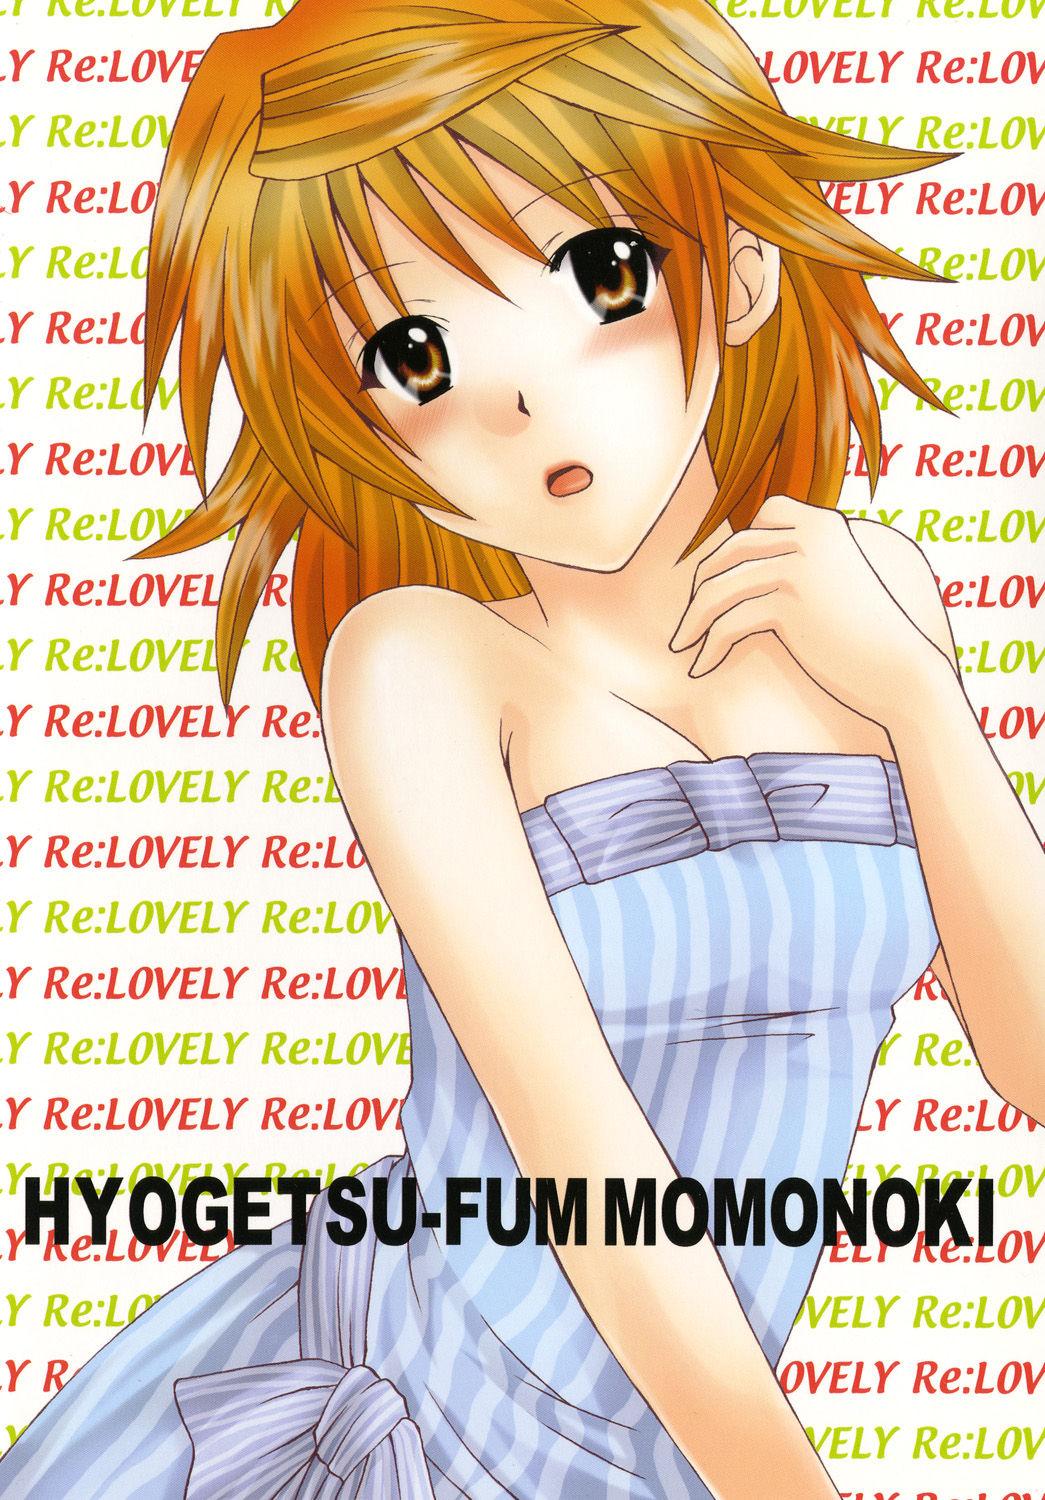 Gay 3some Re:LOVELY - To love-ru Dance - Page 34